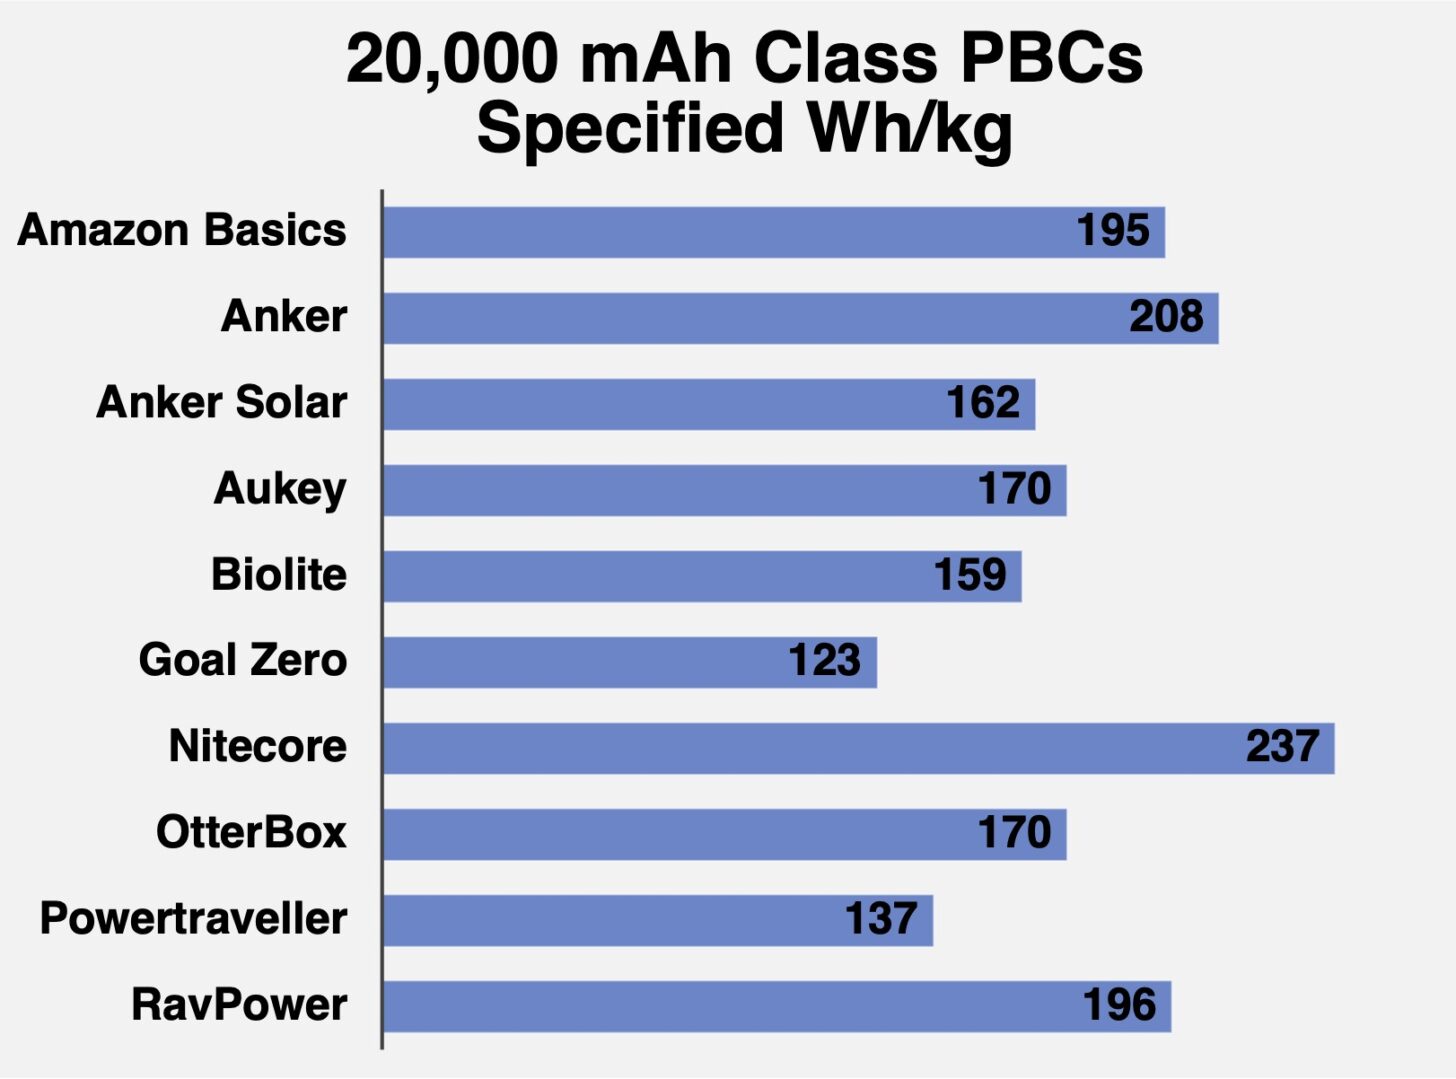 Chart comparing specified energy density in watt-hours per kilogram for each 20,000 mAh class PBC. Higher numbers are better.